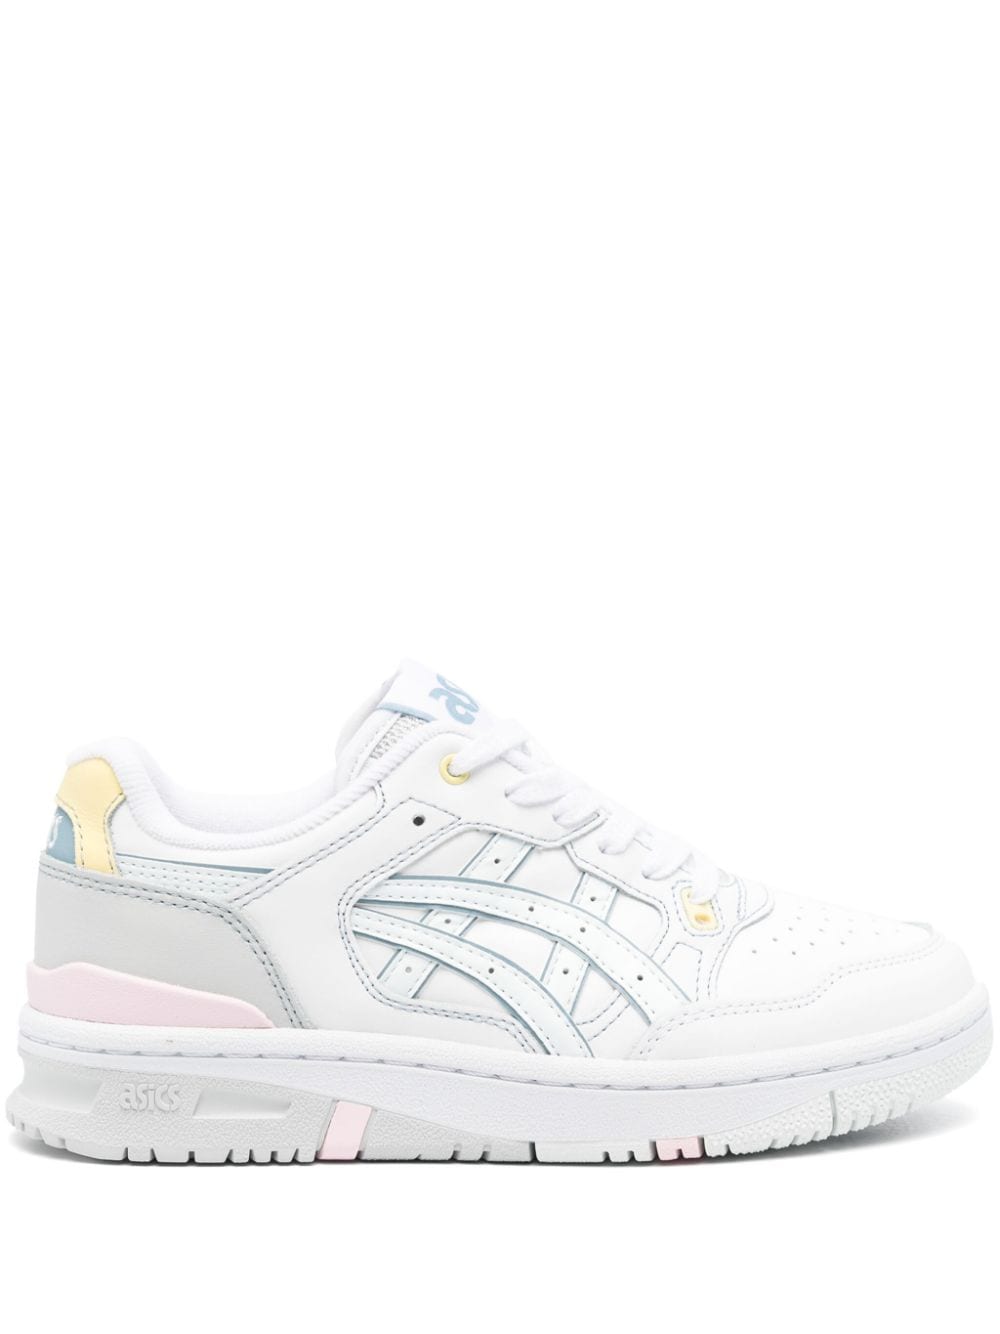 Asics Ex89 Leather Trainers In White